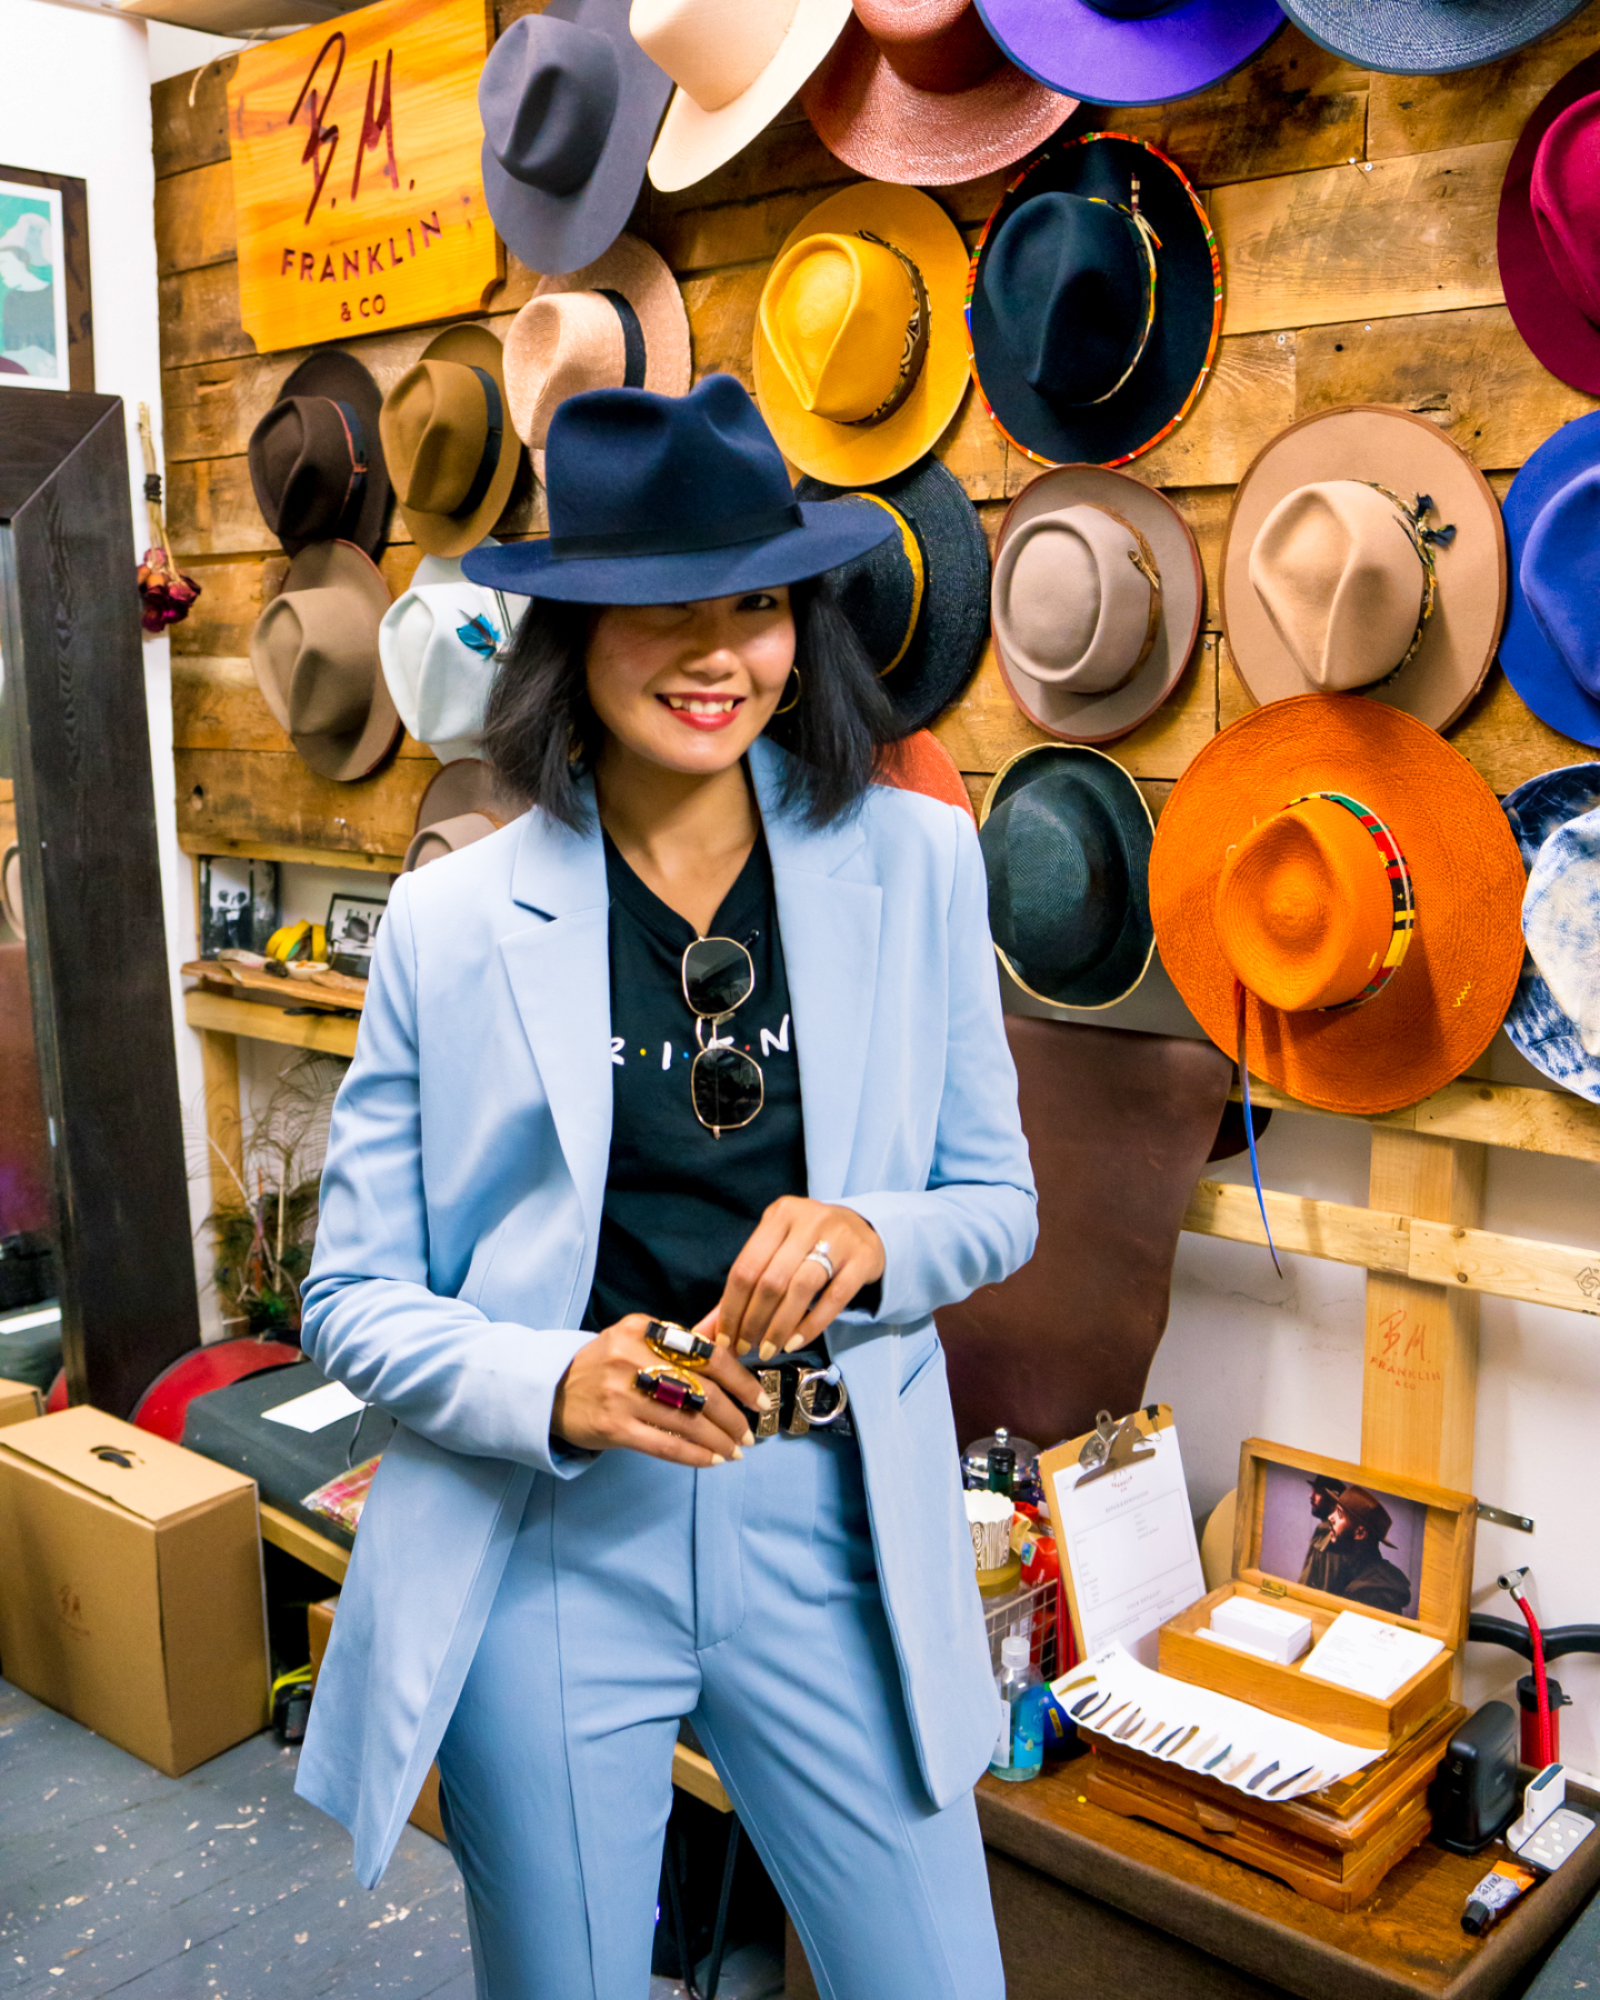 nanphanita visits bm franklin co in nyc and tries on unique hats